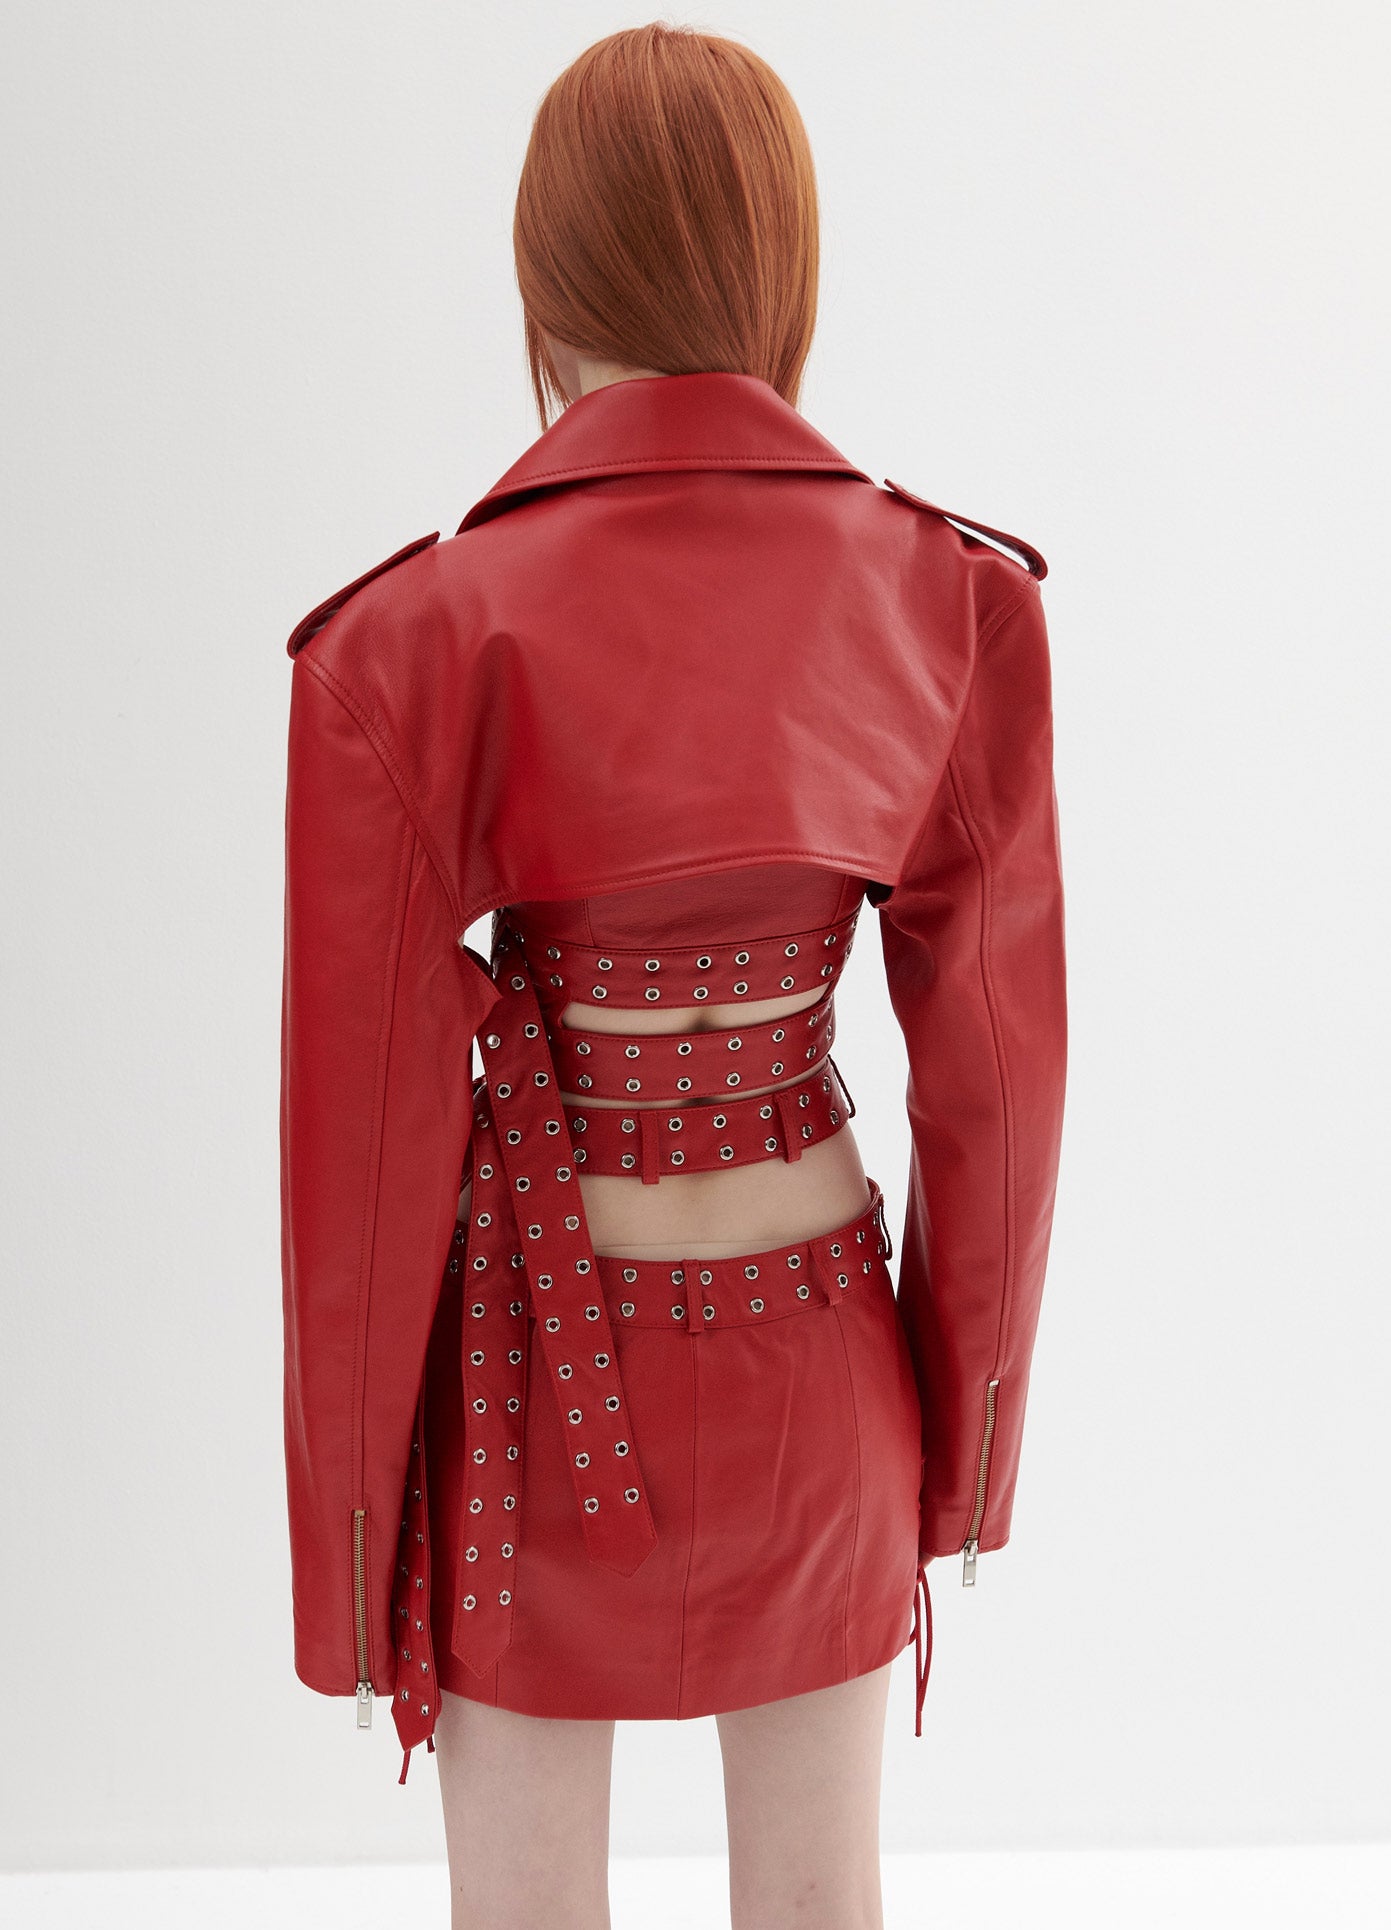 MONSE Leather Cropped Jacket in Red on Model Back View